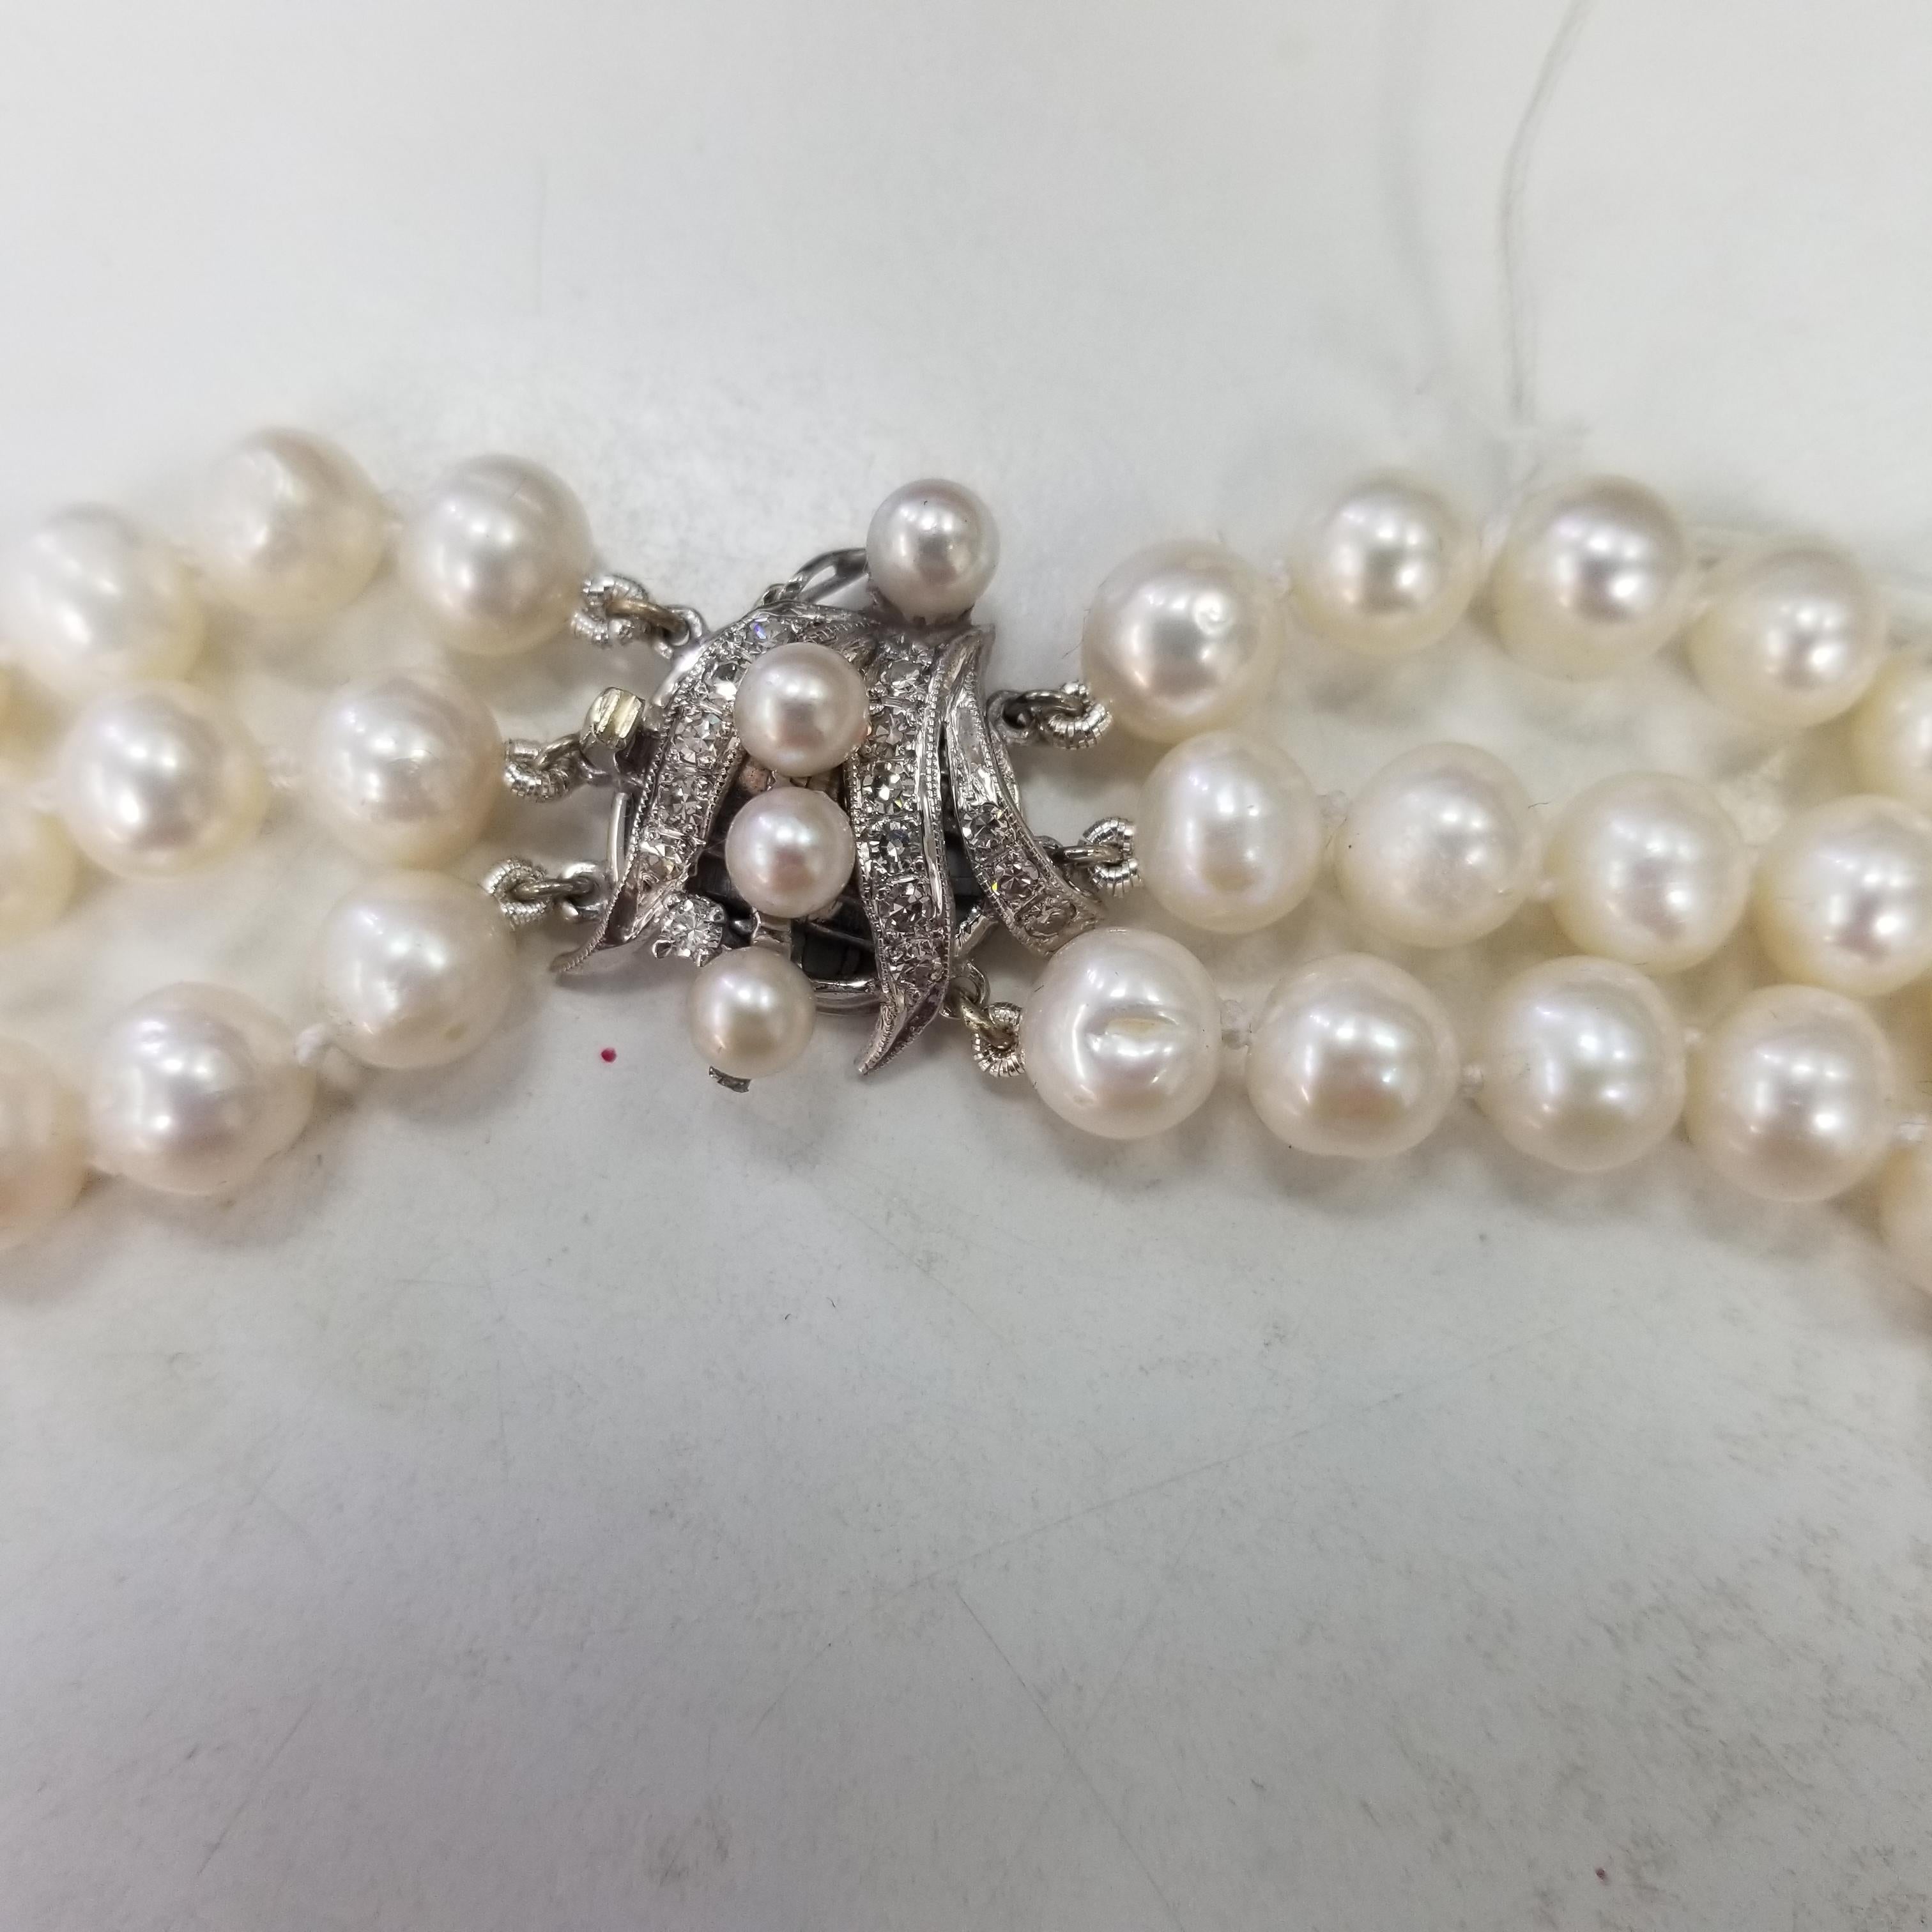 3 strand pearls necklace